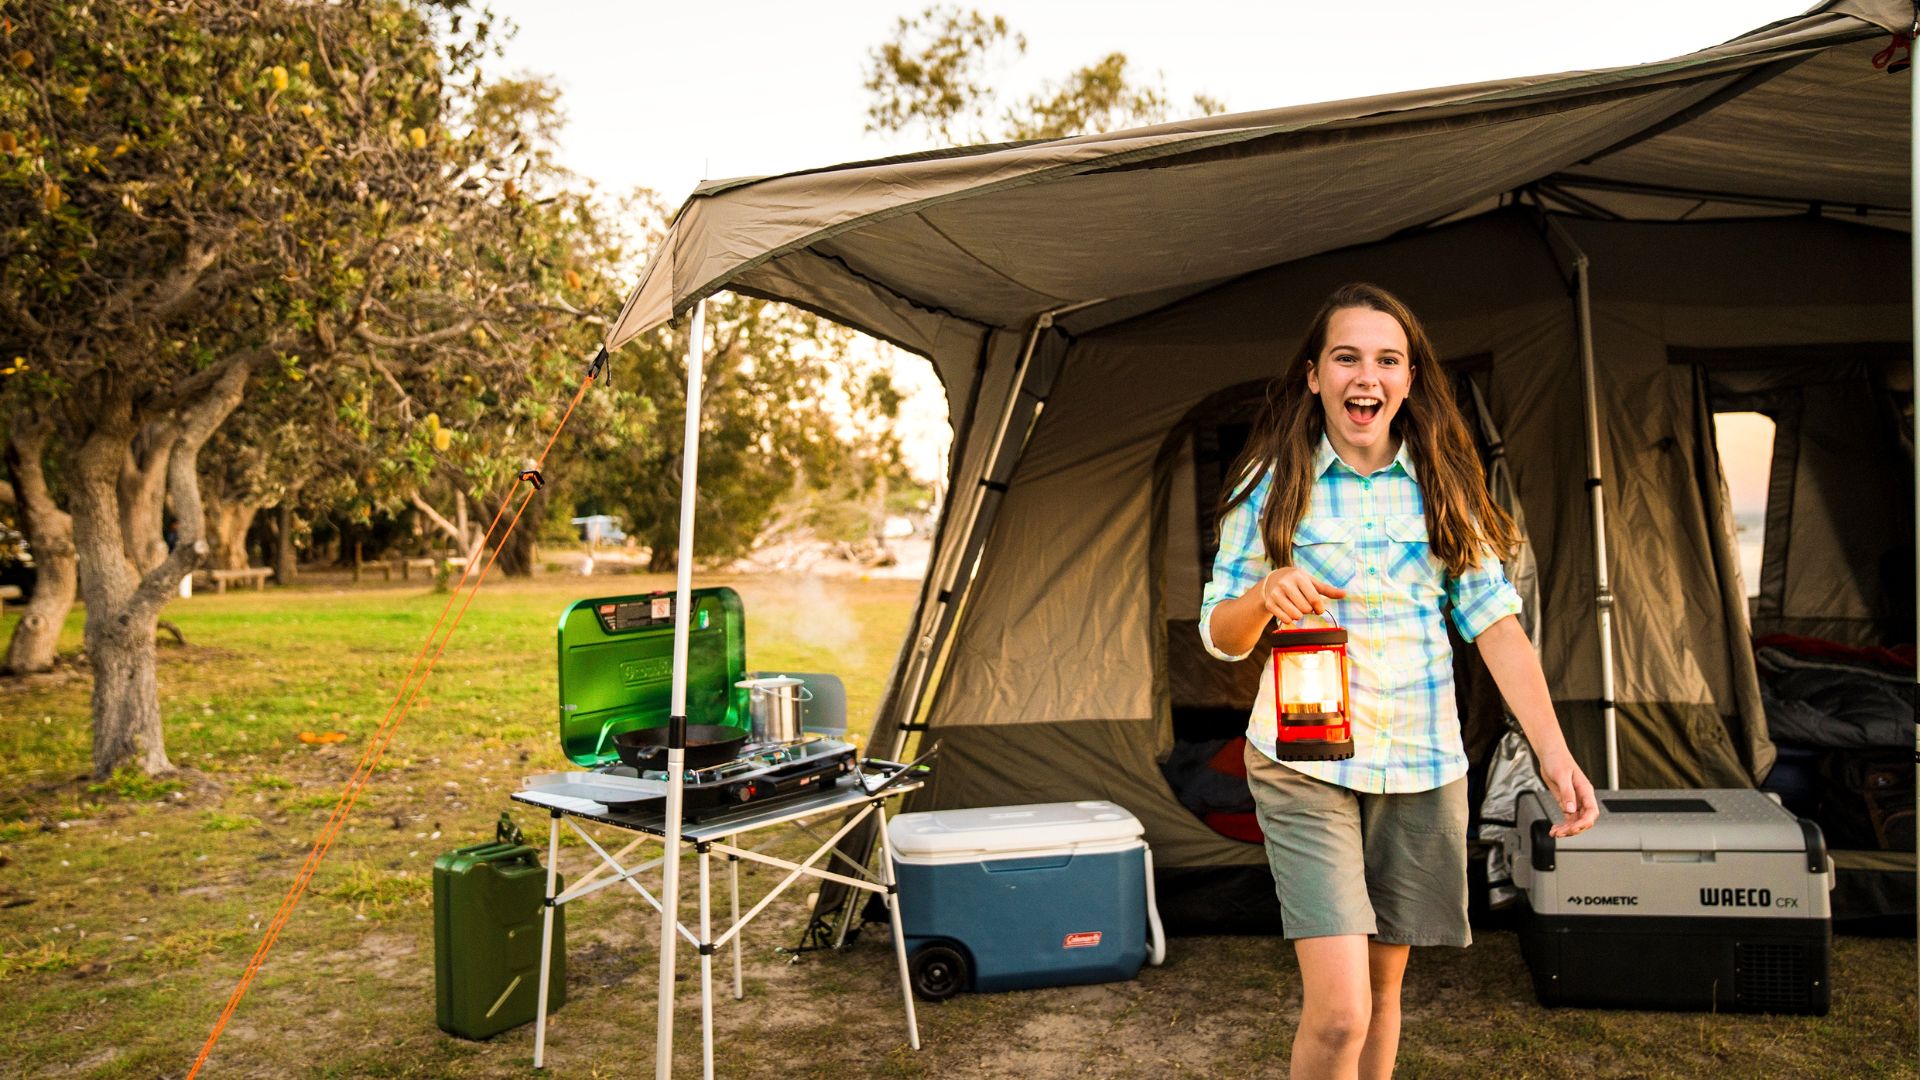 The Best Spots For Camping In Sydney